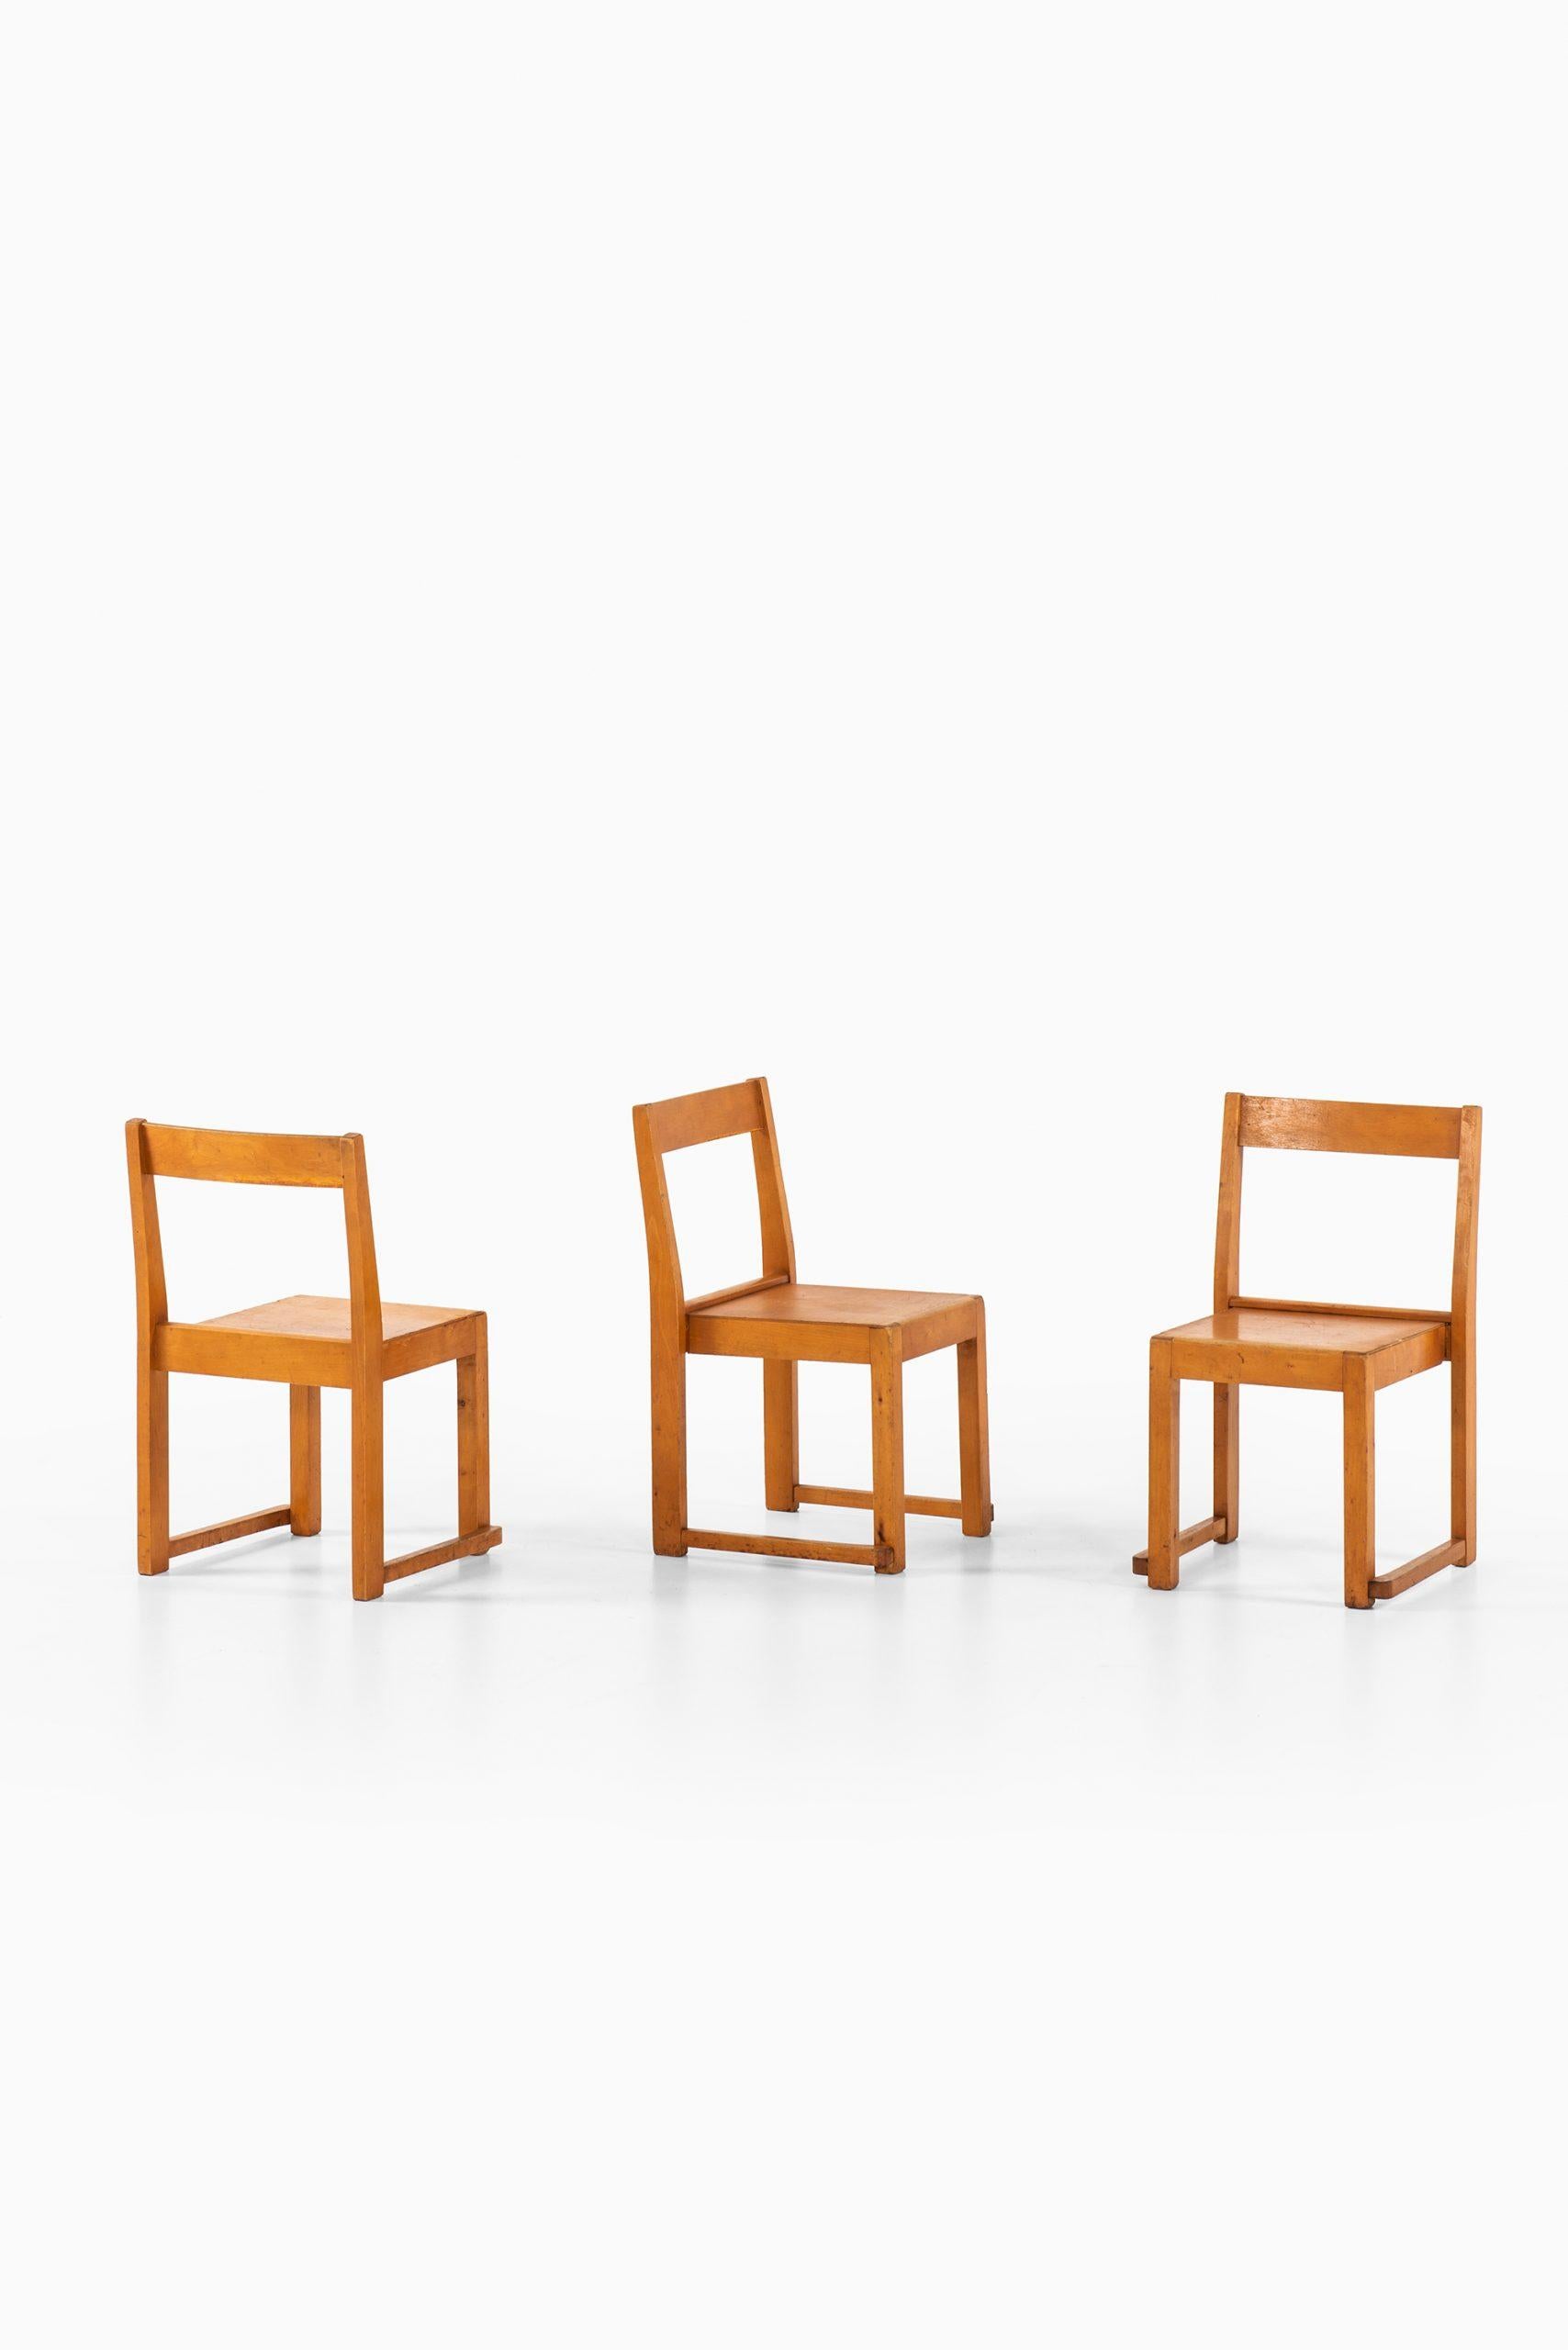 Set of 3 children chairs designed by Sven Markelius. Produced in Sweden.